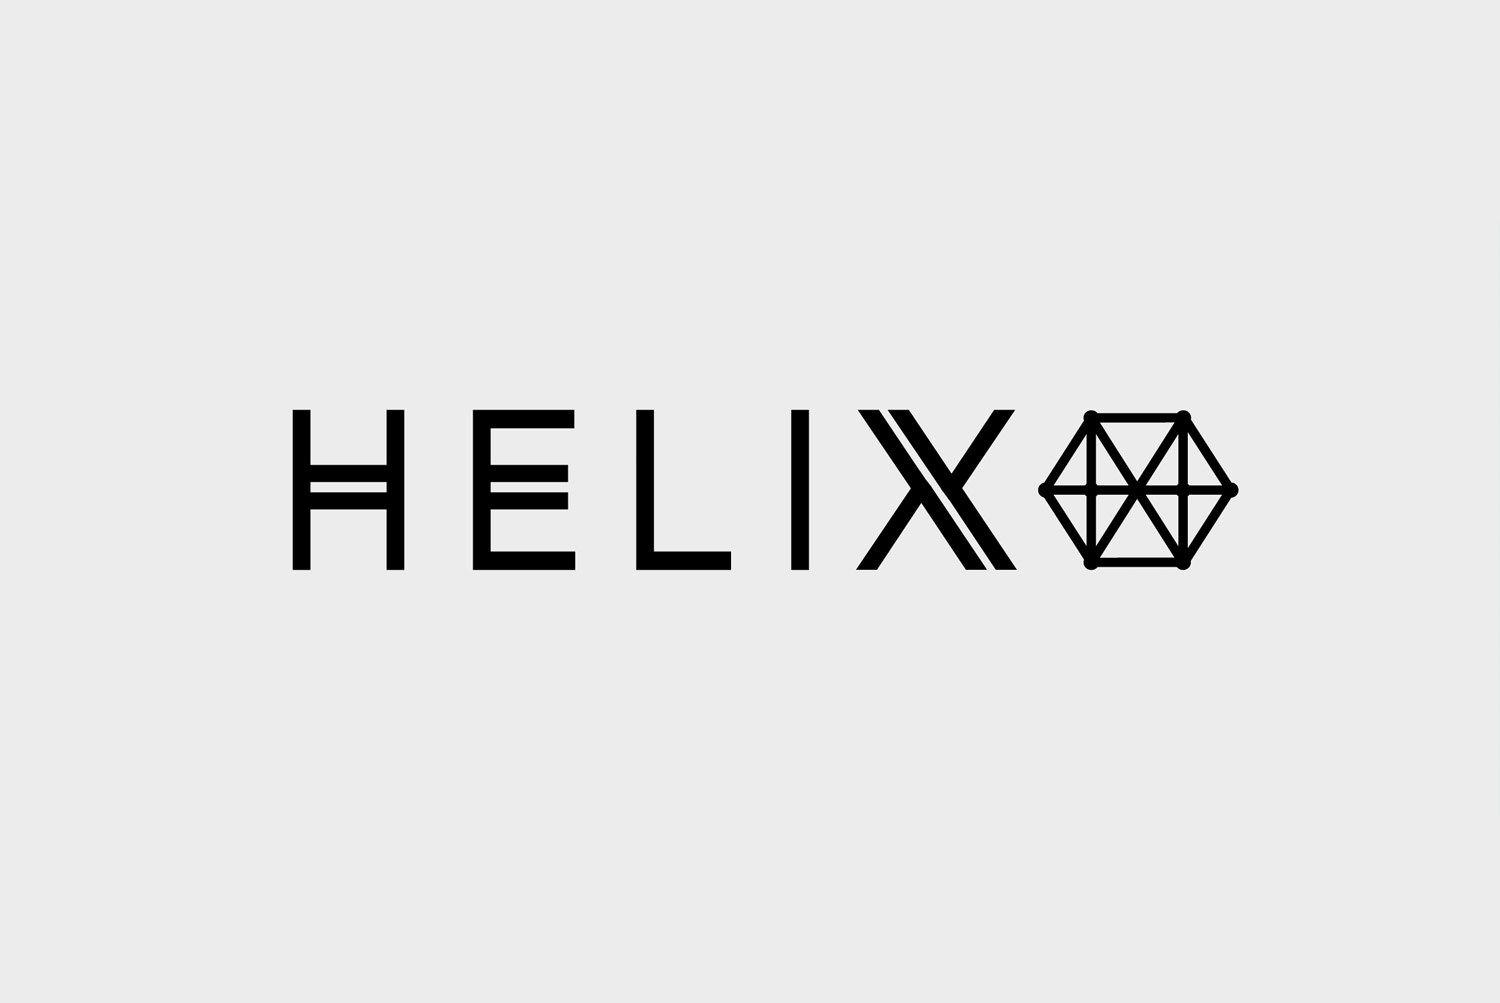 Helix Logo - Helix: logo design, branding and strategy for startup brand. Middle